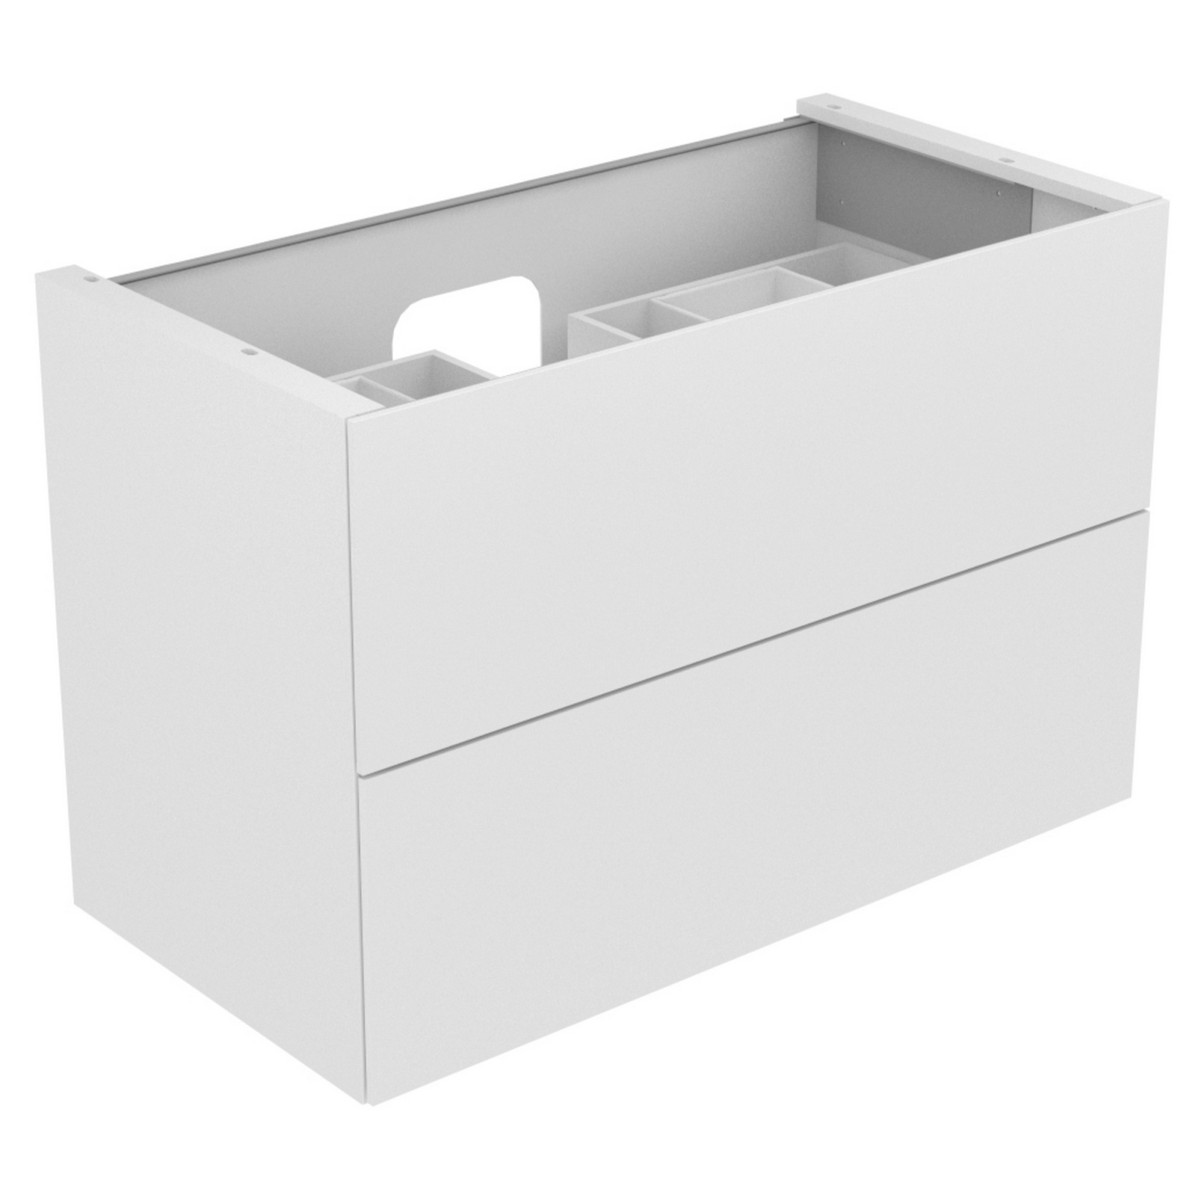 KEUCO 3135200 EDITION 11 41 3/8 INCH 2-DRAWERS WALL MOUNTED SINGLE SINK BATHROOM VANITY CABINET ONLY